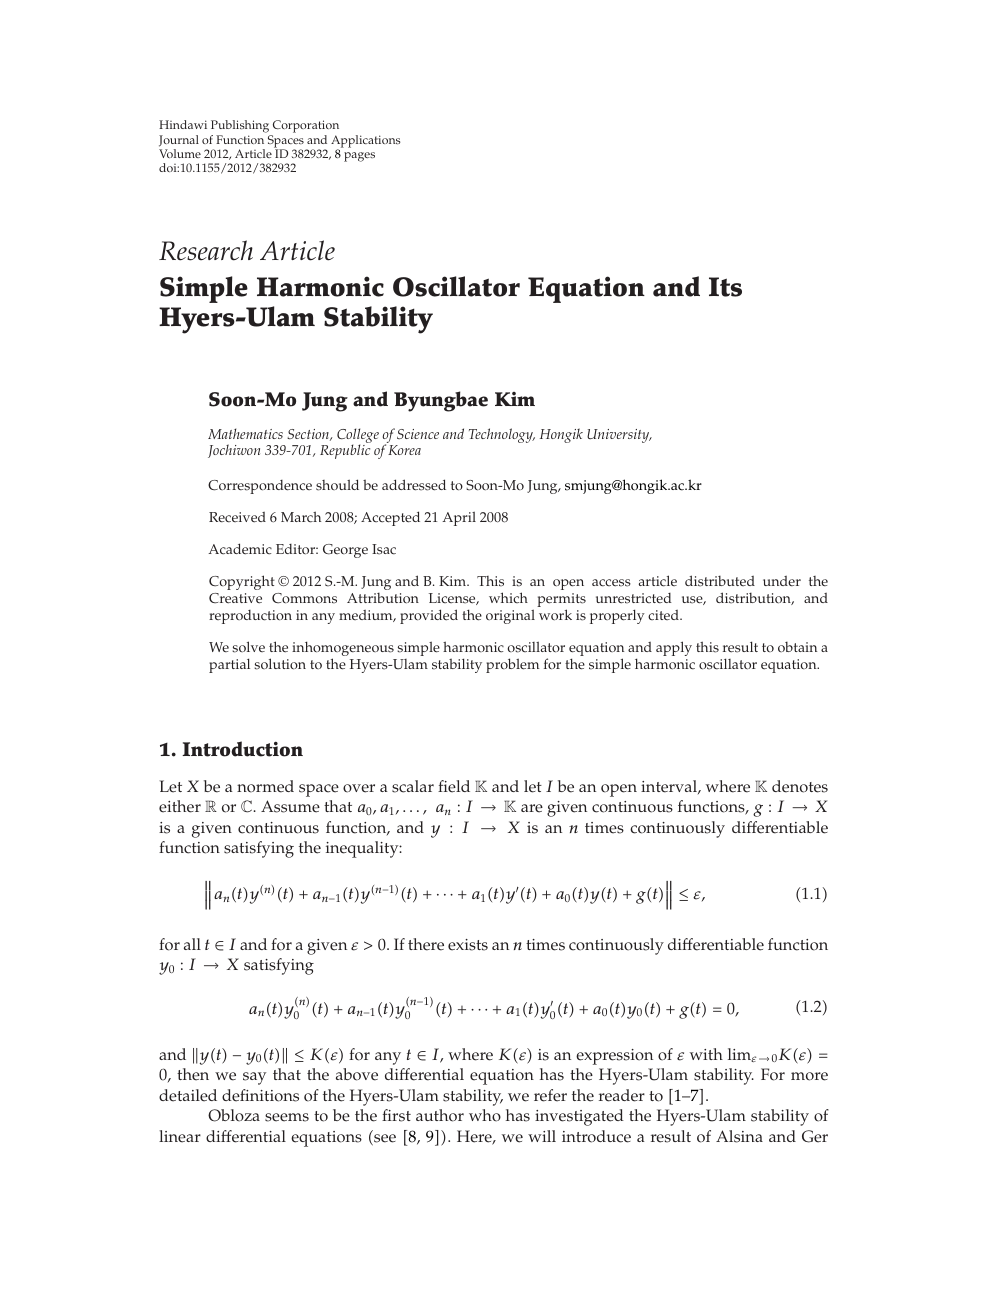 Simple Harmonic Oscillator Equation And Its Hyers Ulam Stability Topic Of Research Paper In Mathematics Download Scholarly Article Pdf And Read For Free On Cyberleninka Open Science Hub